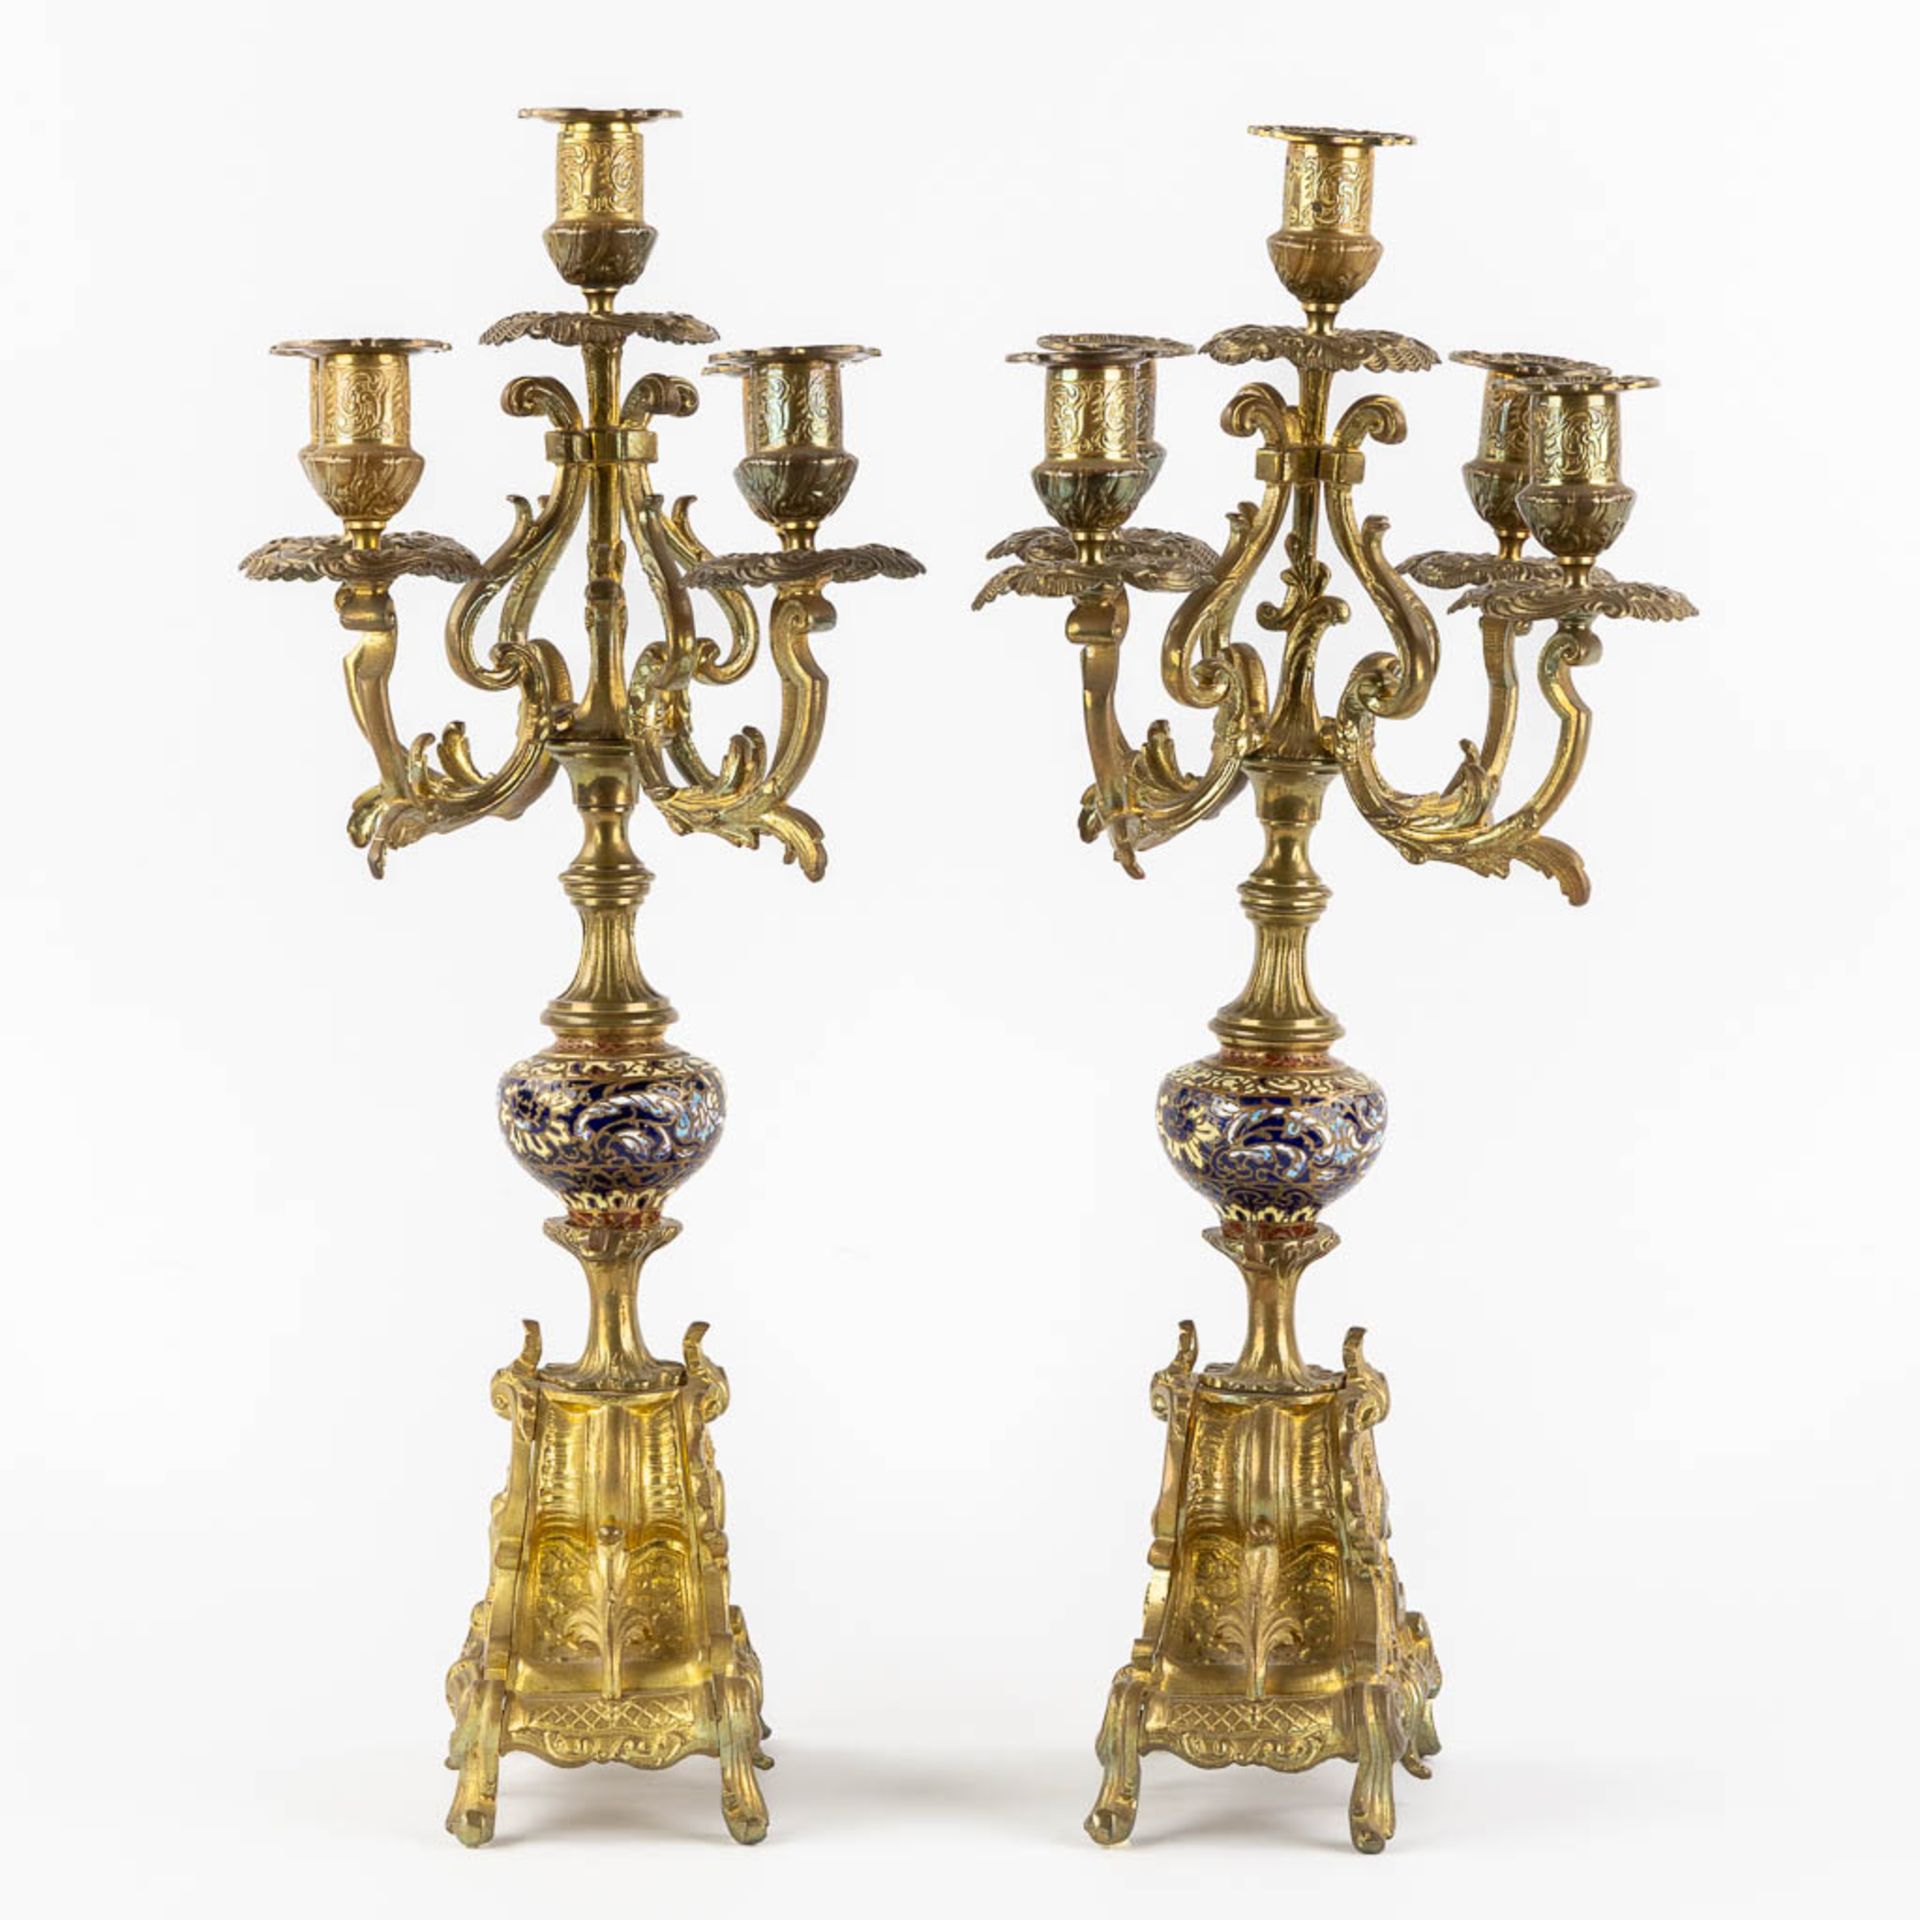 Two pairs of candelabra, bronze and cloisonné, Empire and Louis XVI style. (H:49 x D:26 cm) - Bild 6 aus 18